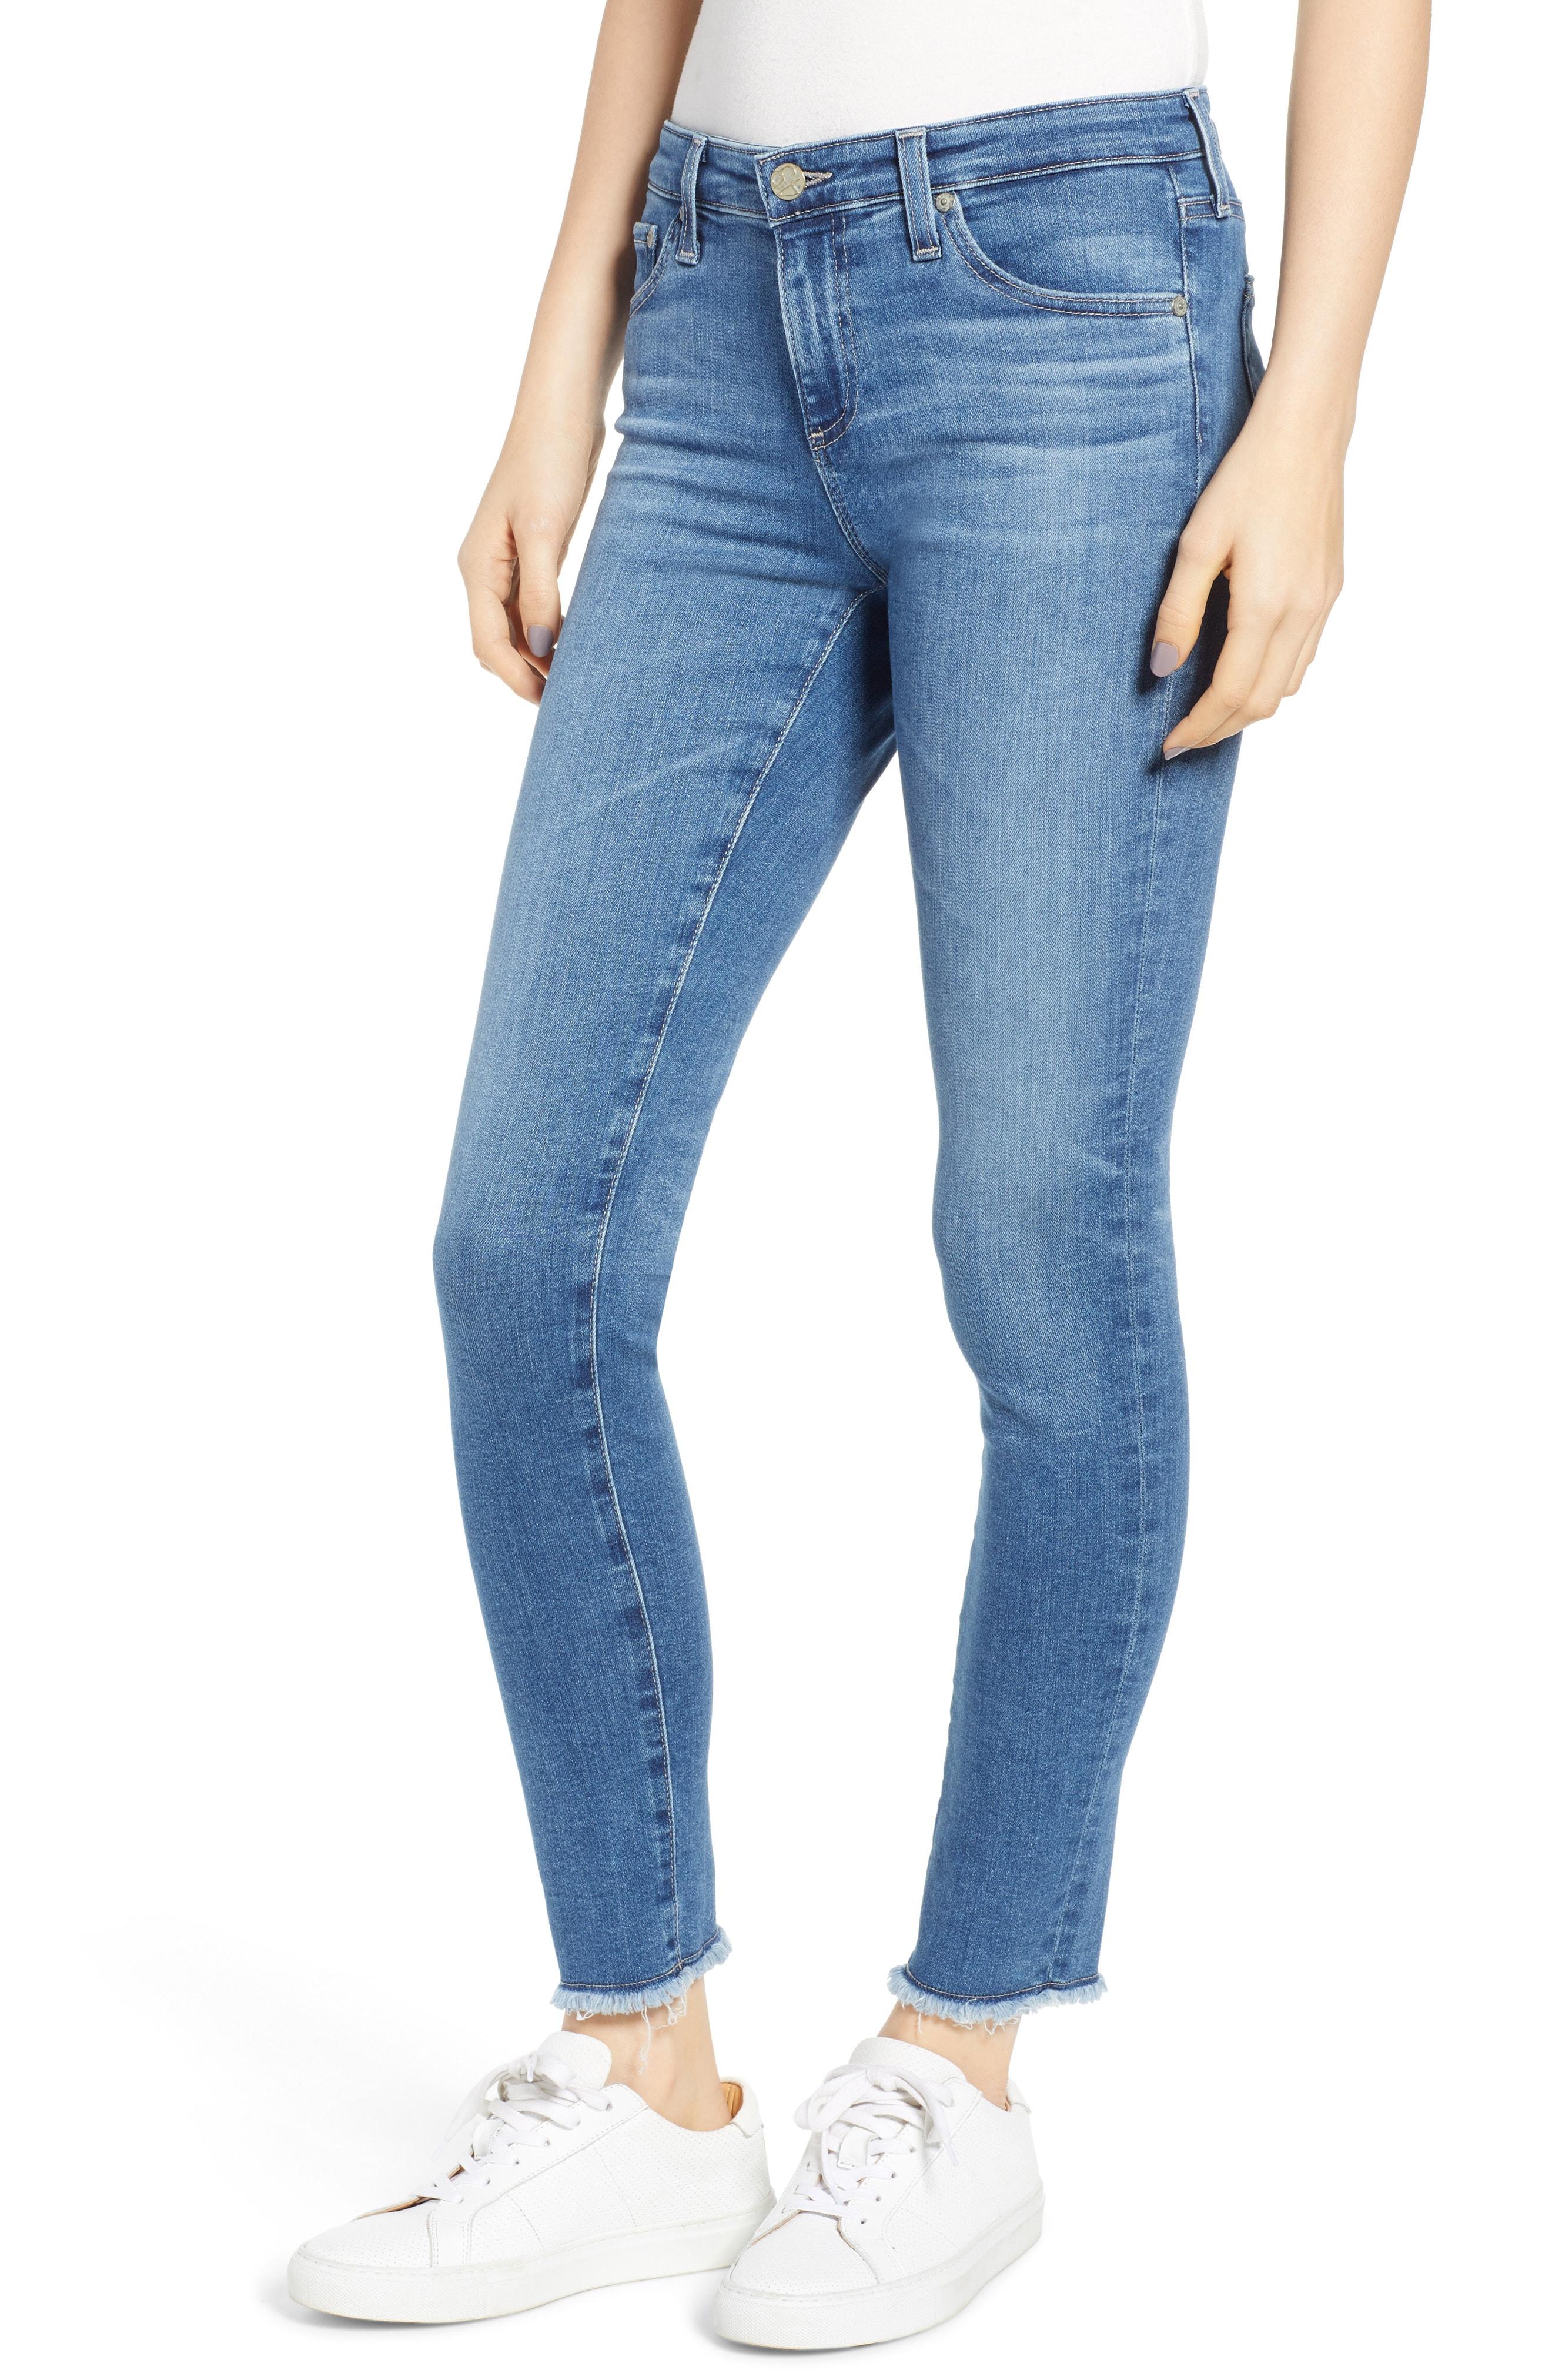 Lyst - AG Jeans The Legging Frayed Ankle Super Skinny Jeans in Blue